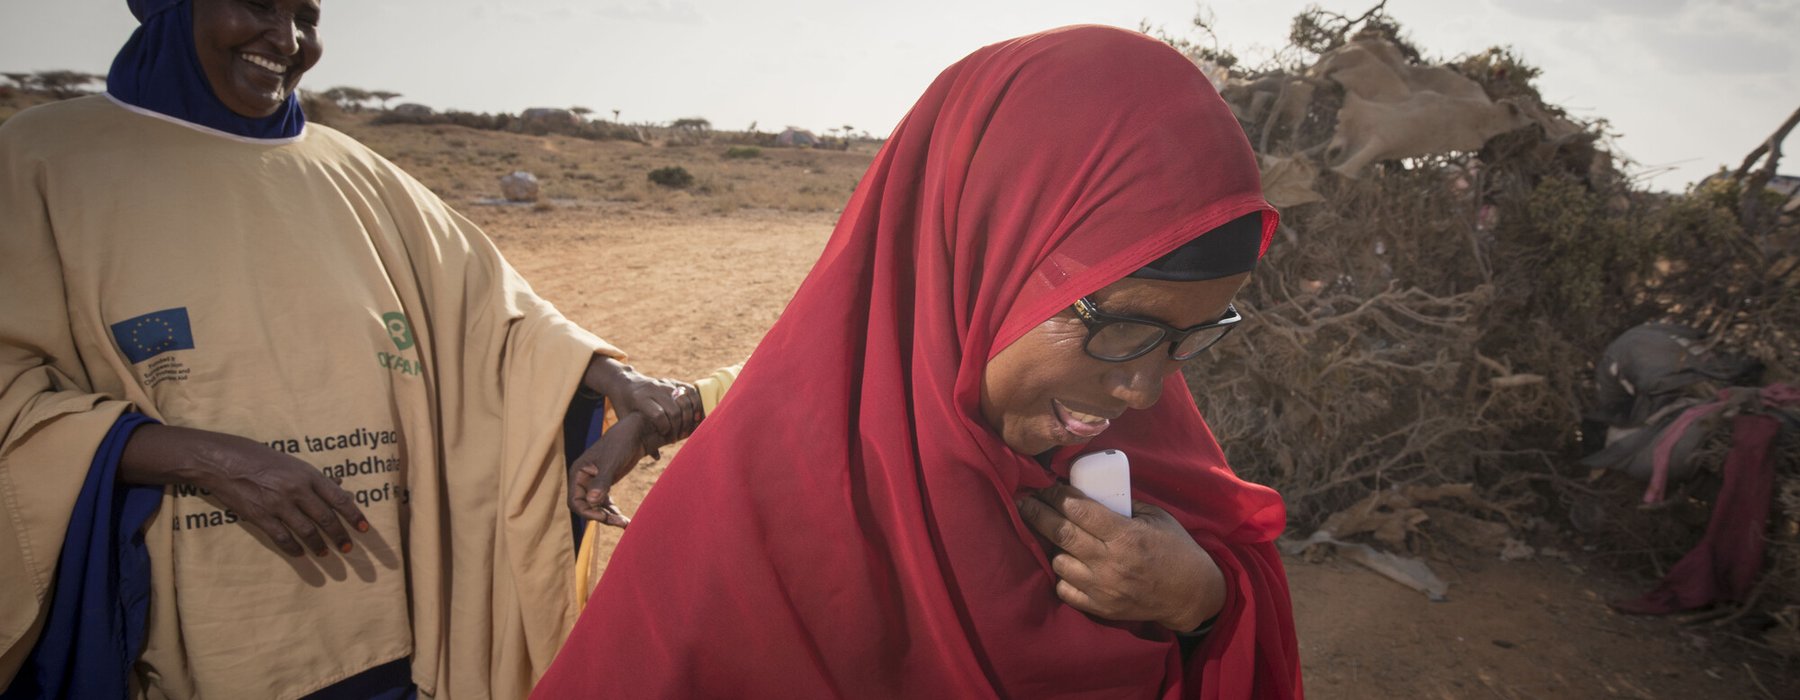 Middle aged Somalian Ibaado wears a dark red hijab and smiles as she walks along the ground with a colleague who has a cobalt blue hijab and wears an Oxfam jacket